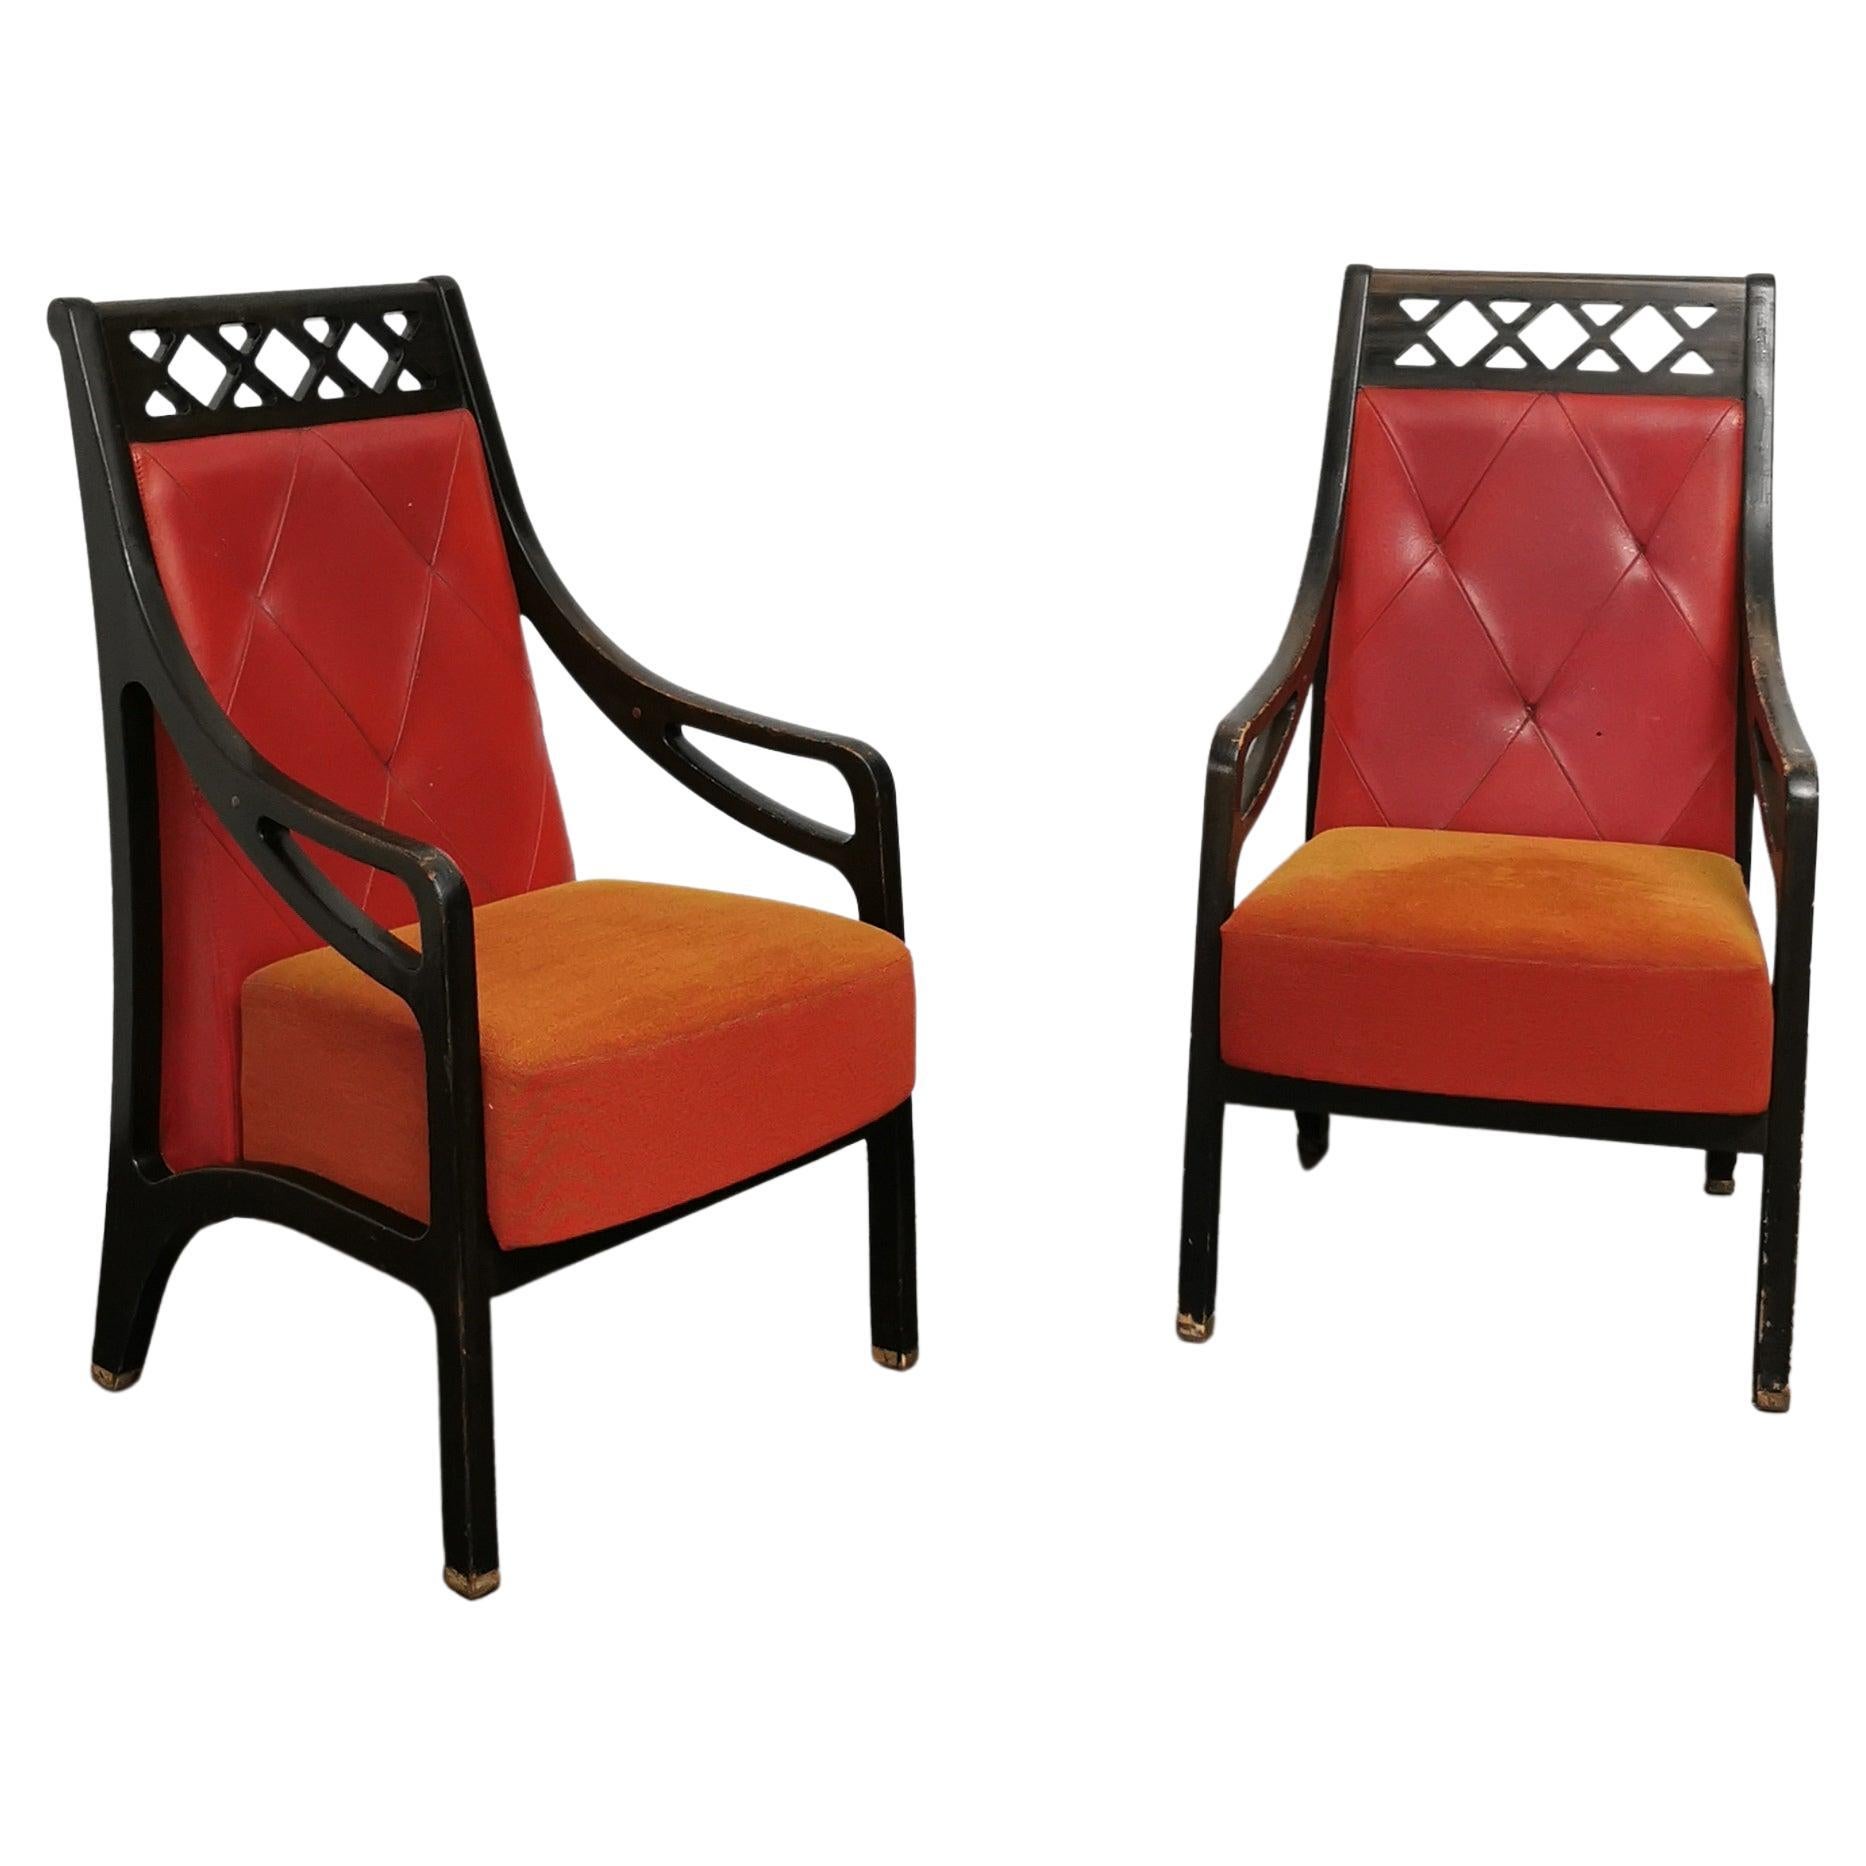 Art Deco Armchairs Wood Velvet Red Leather Brass Italian Design 1930s Set of 2 In Fair Condition For Sale In Palermo, IT